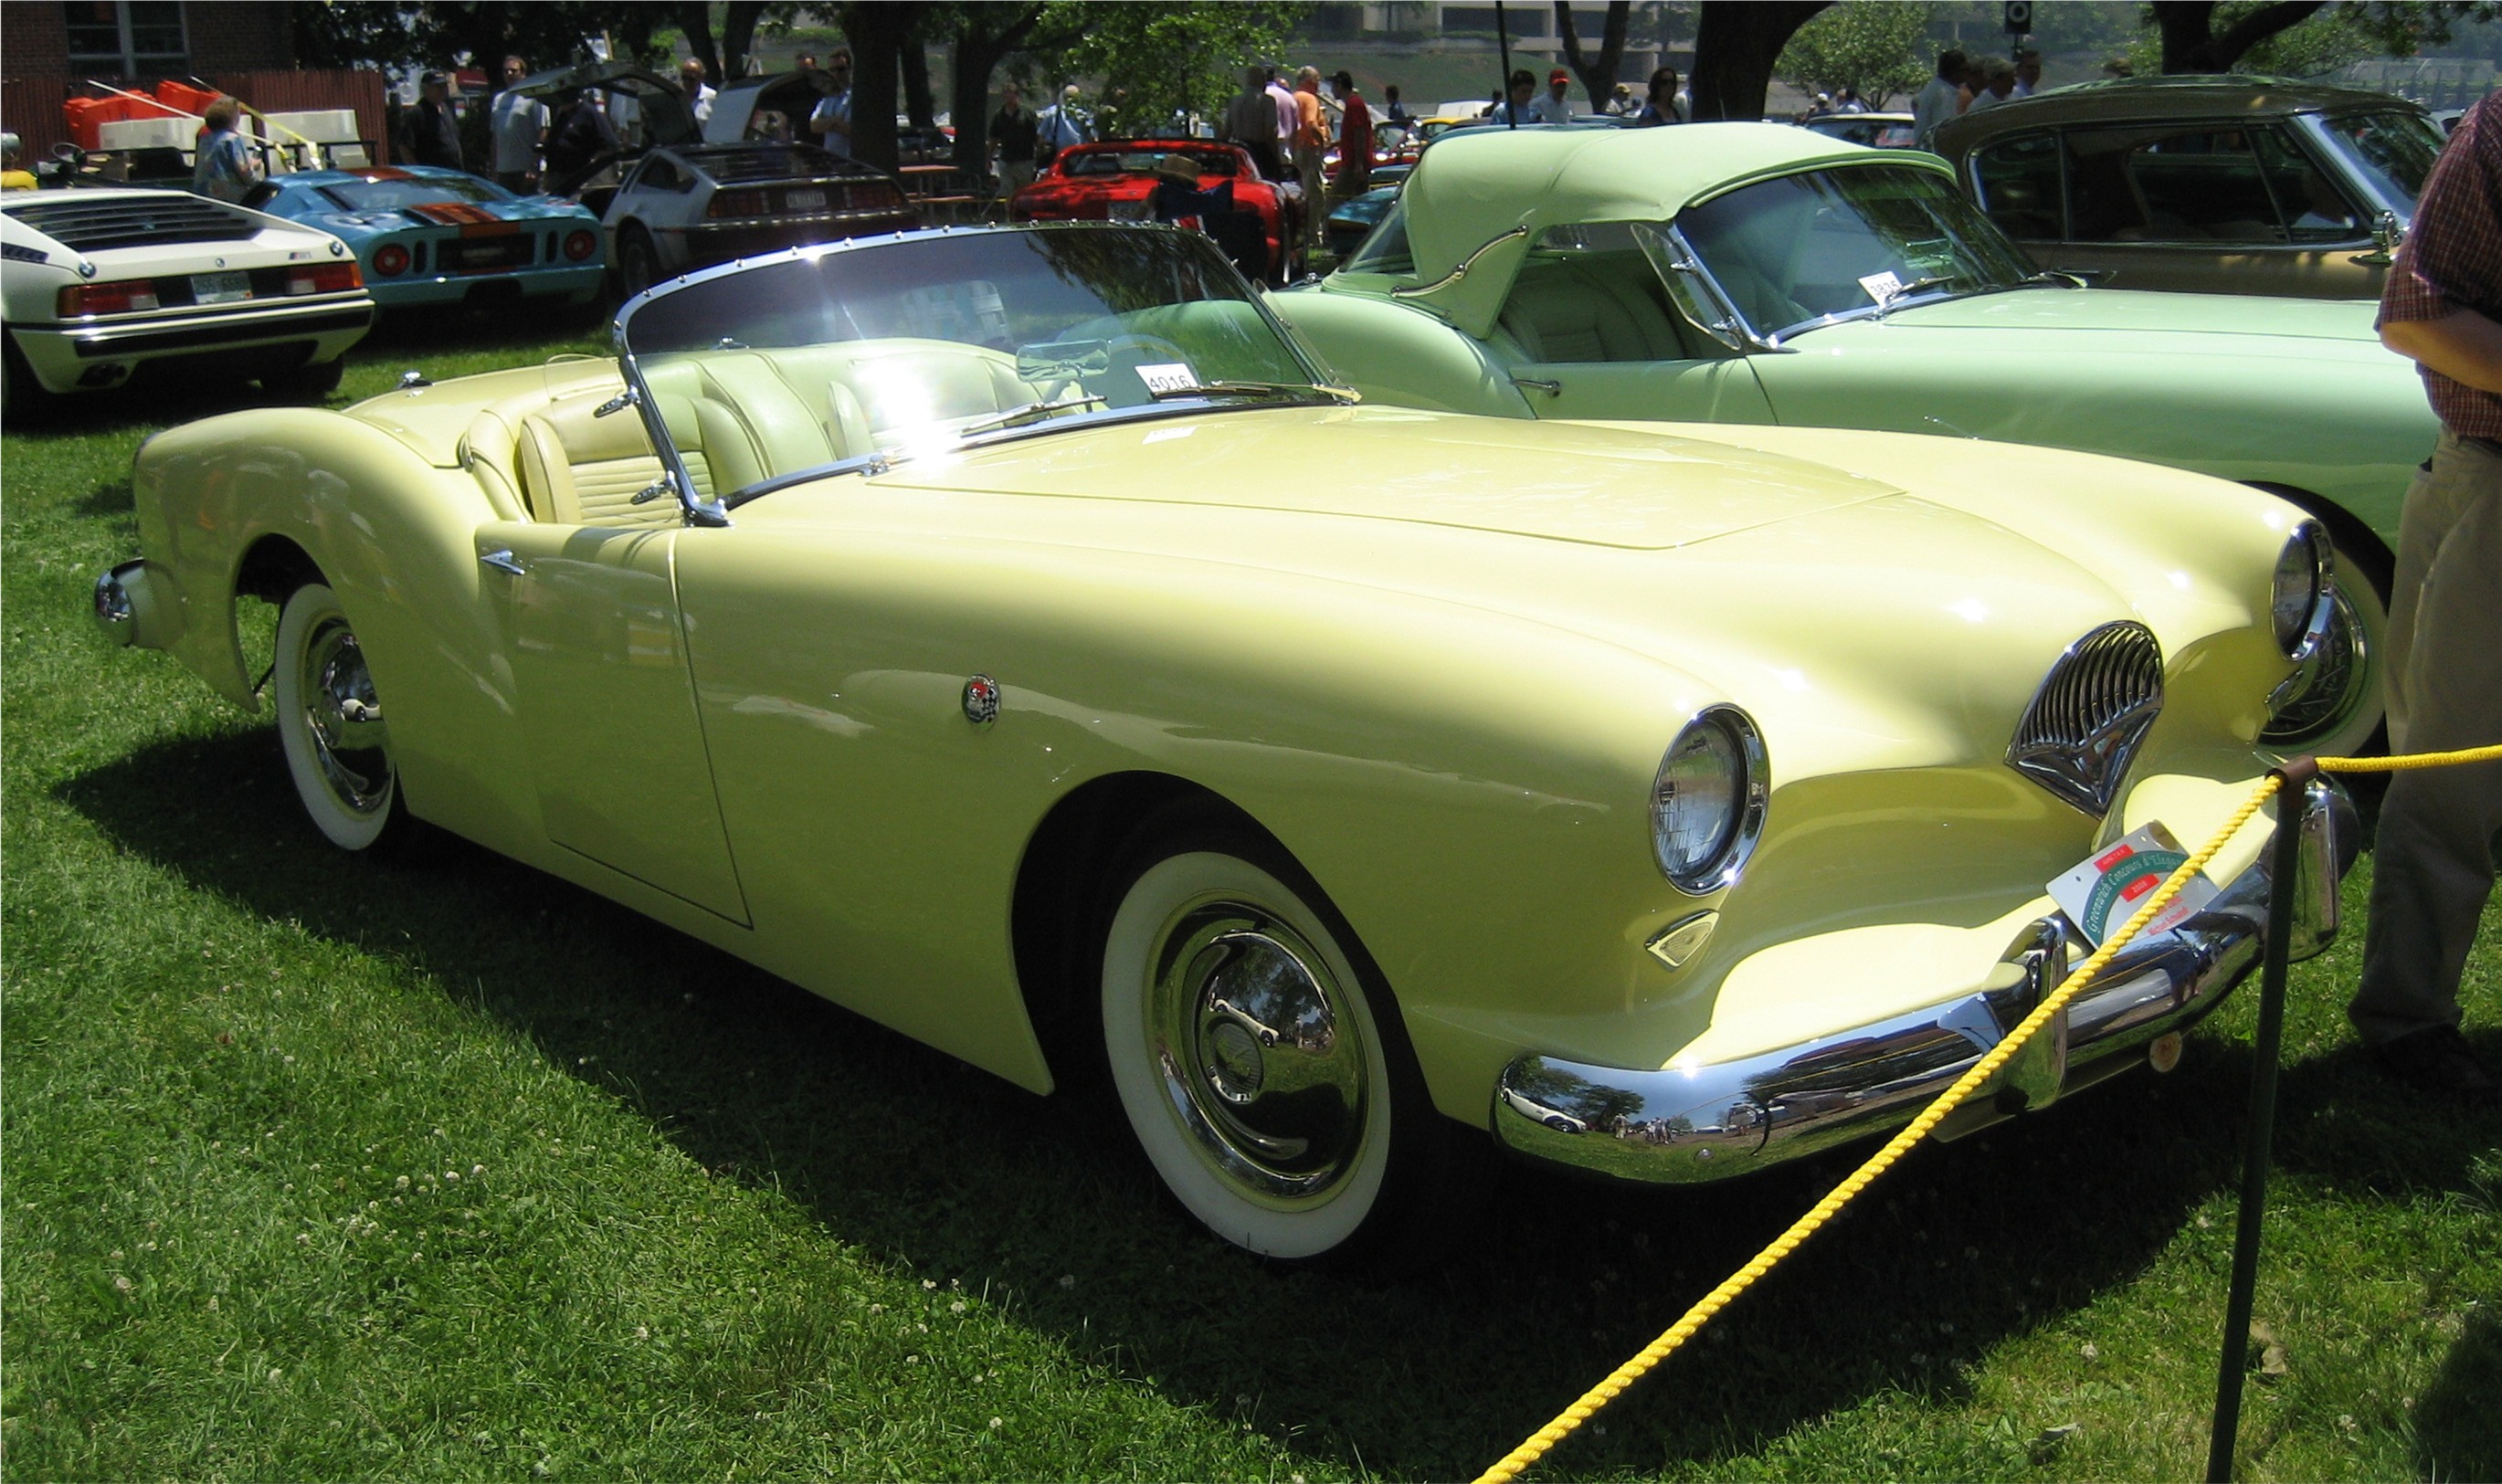 A yellow 1954 Kaiser Darrin convertible at the 2008 Greenwich Concours d'Elegance